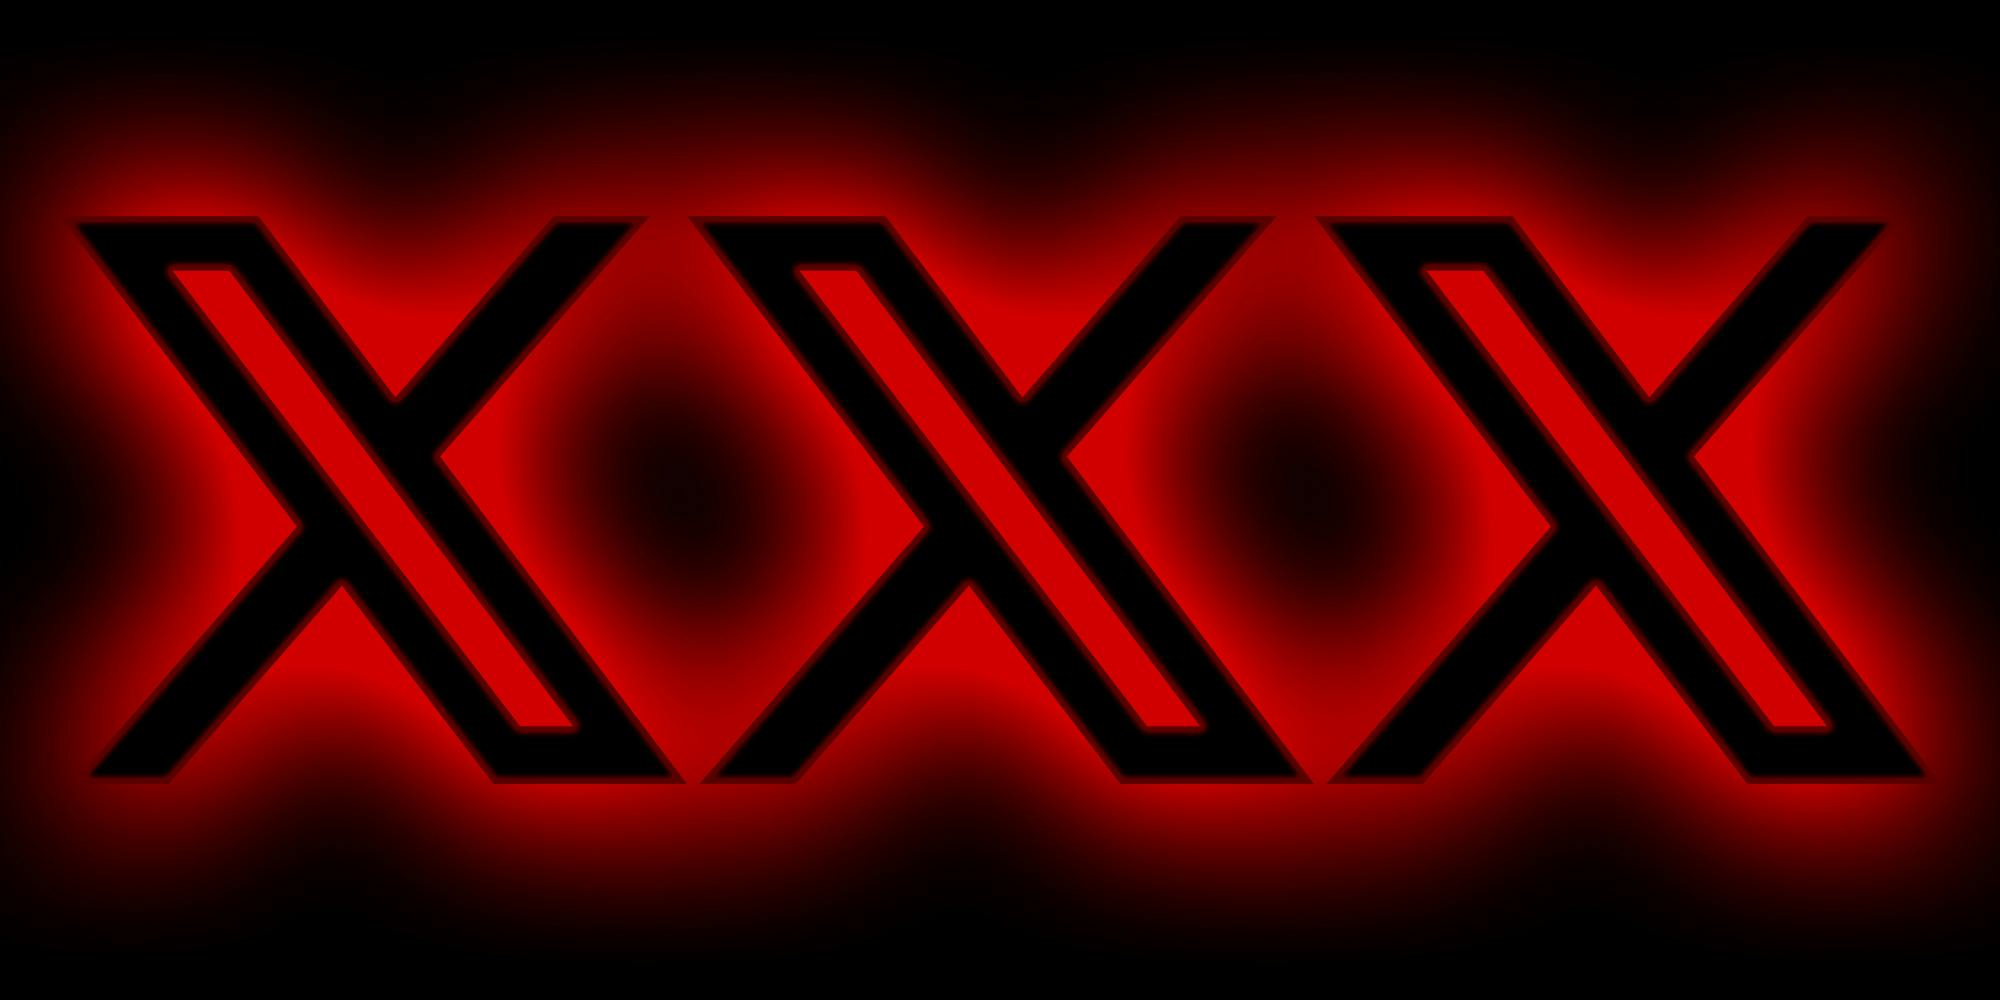 "X" logo repeated three times with red glow